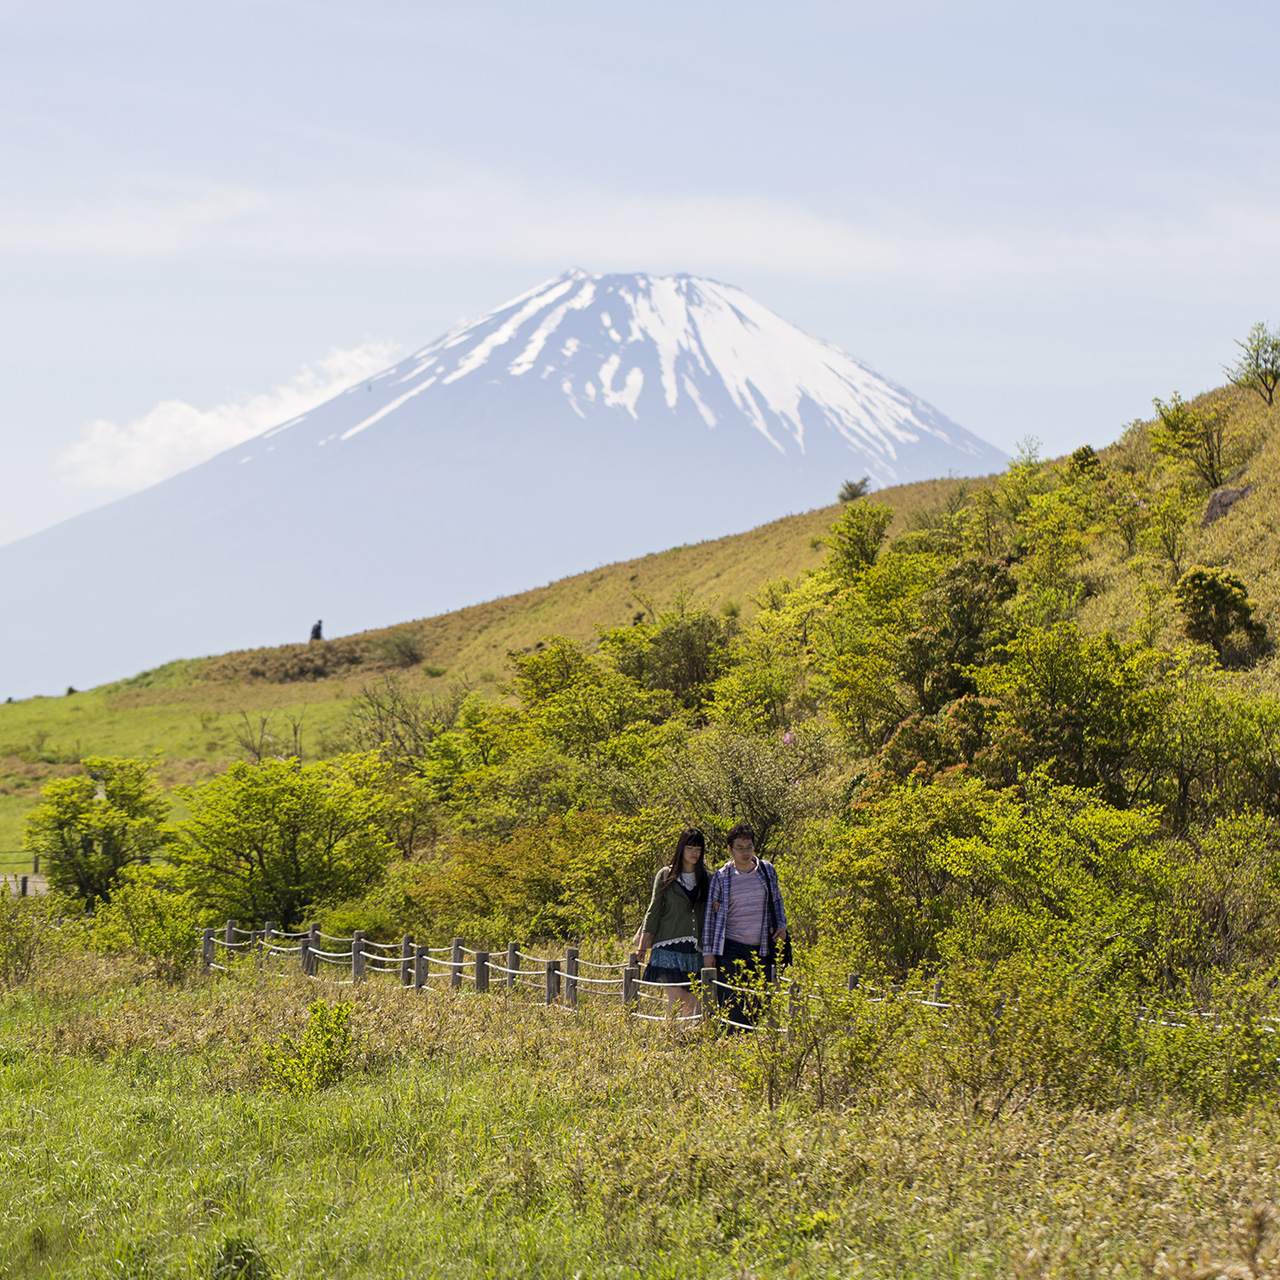 People walking through field with Mount Fuji in the background